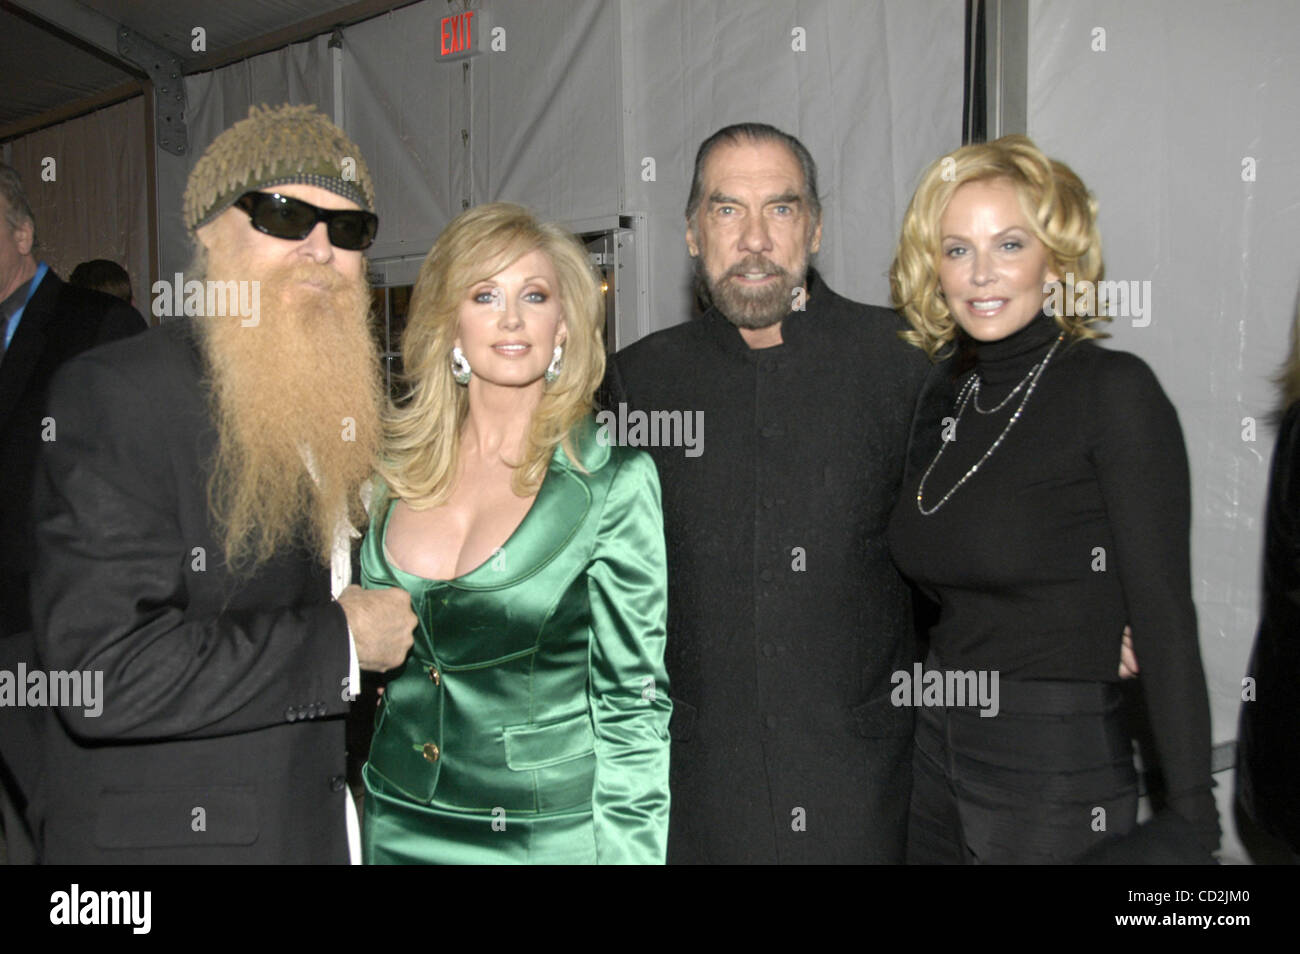 Mar 07, 2008 - Austin, Texas, USA - Texas Film Hall Of Fame honorees BILLY GIBBONS (Left) of ZZ Top and MORGAN FAIRCHILD (second from left)  meet with JOHN PAUL DEJORIA and his wife ELOISE at the Texas Film Hall Of Fame 2008 sponsored by the Austin Film Society. (Credit Image: © Peter Silva/ZUMA Pre Stock Photo